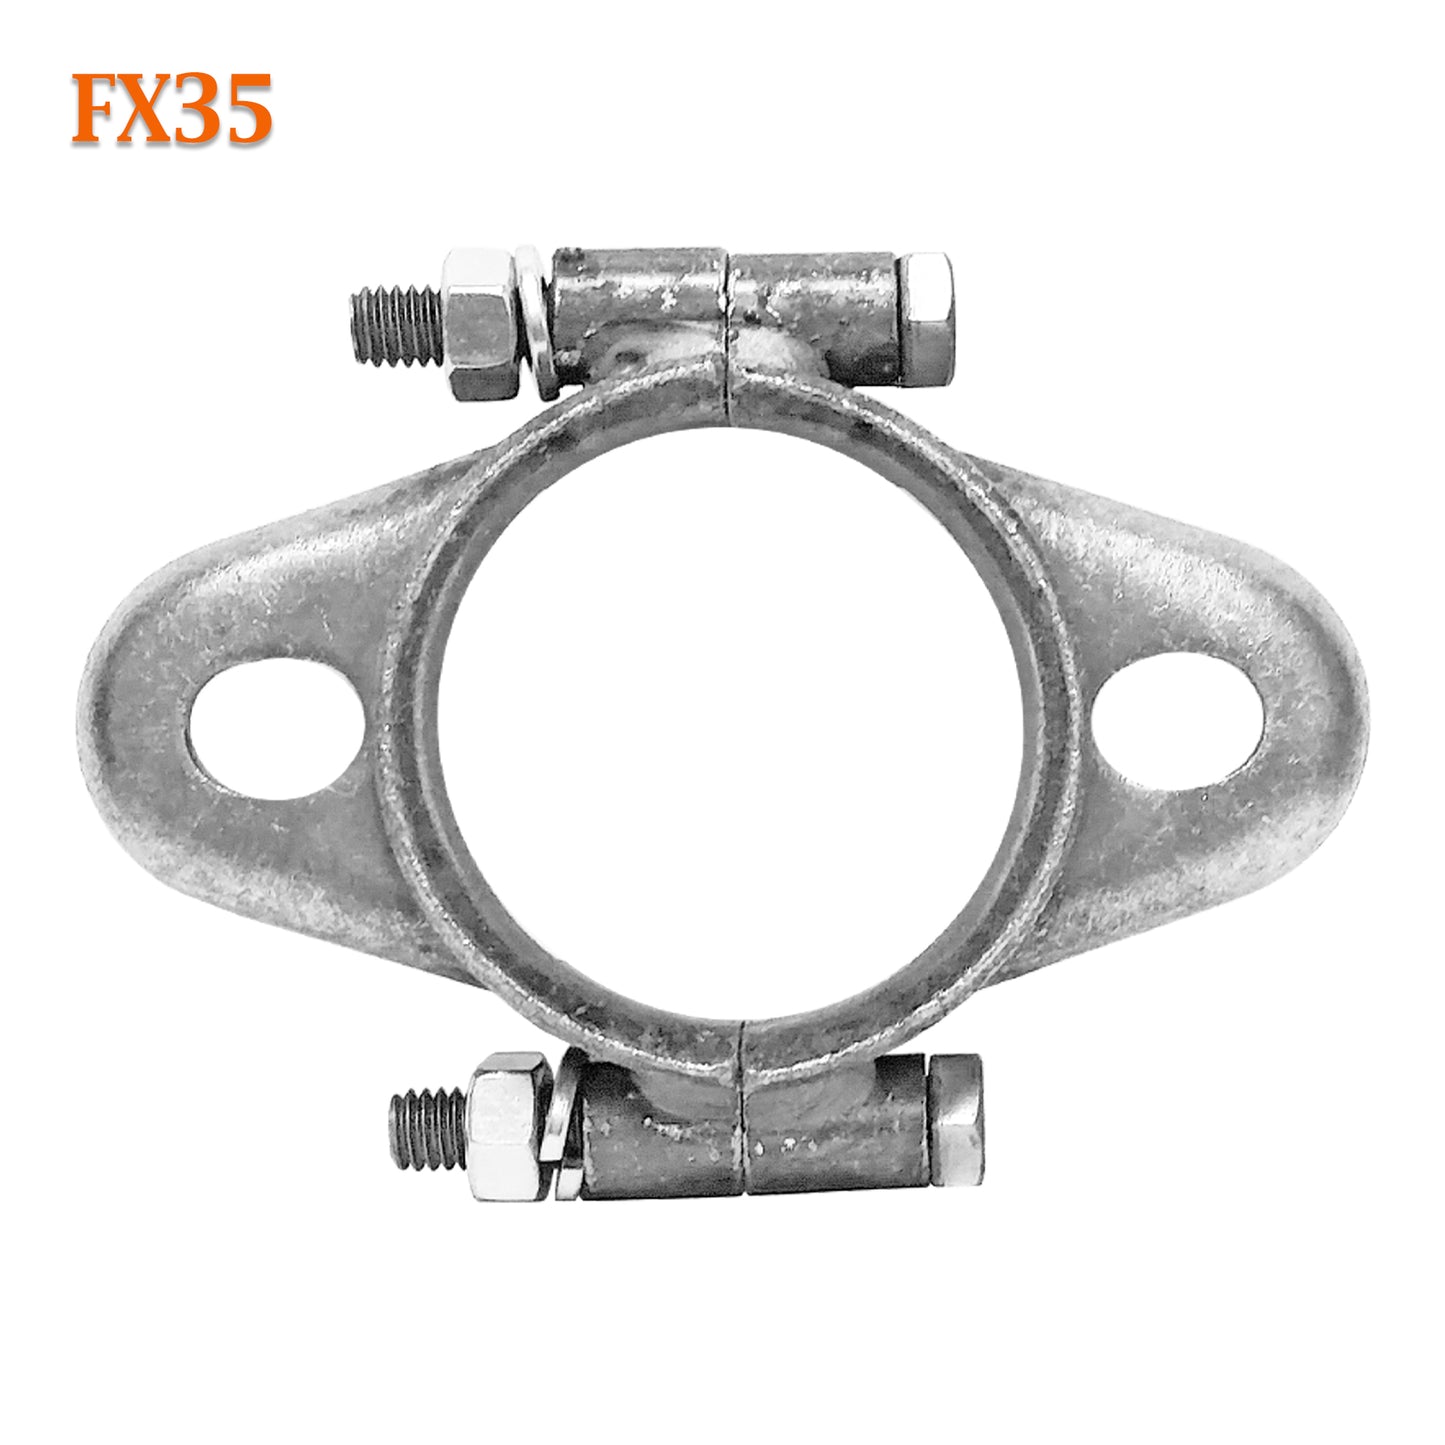 FX35 2 1/8" 2.125" Exhaust Flange Formed Oval Split For 1 3/4" 1.75" Flared Pipe